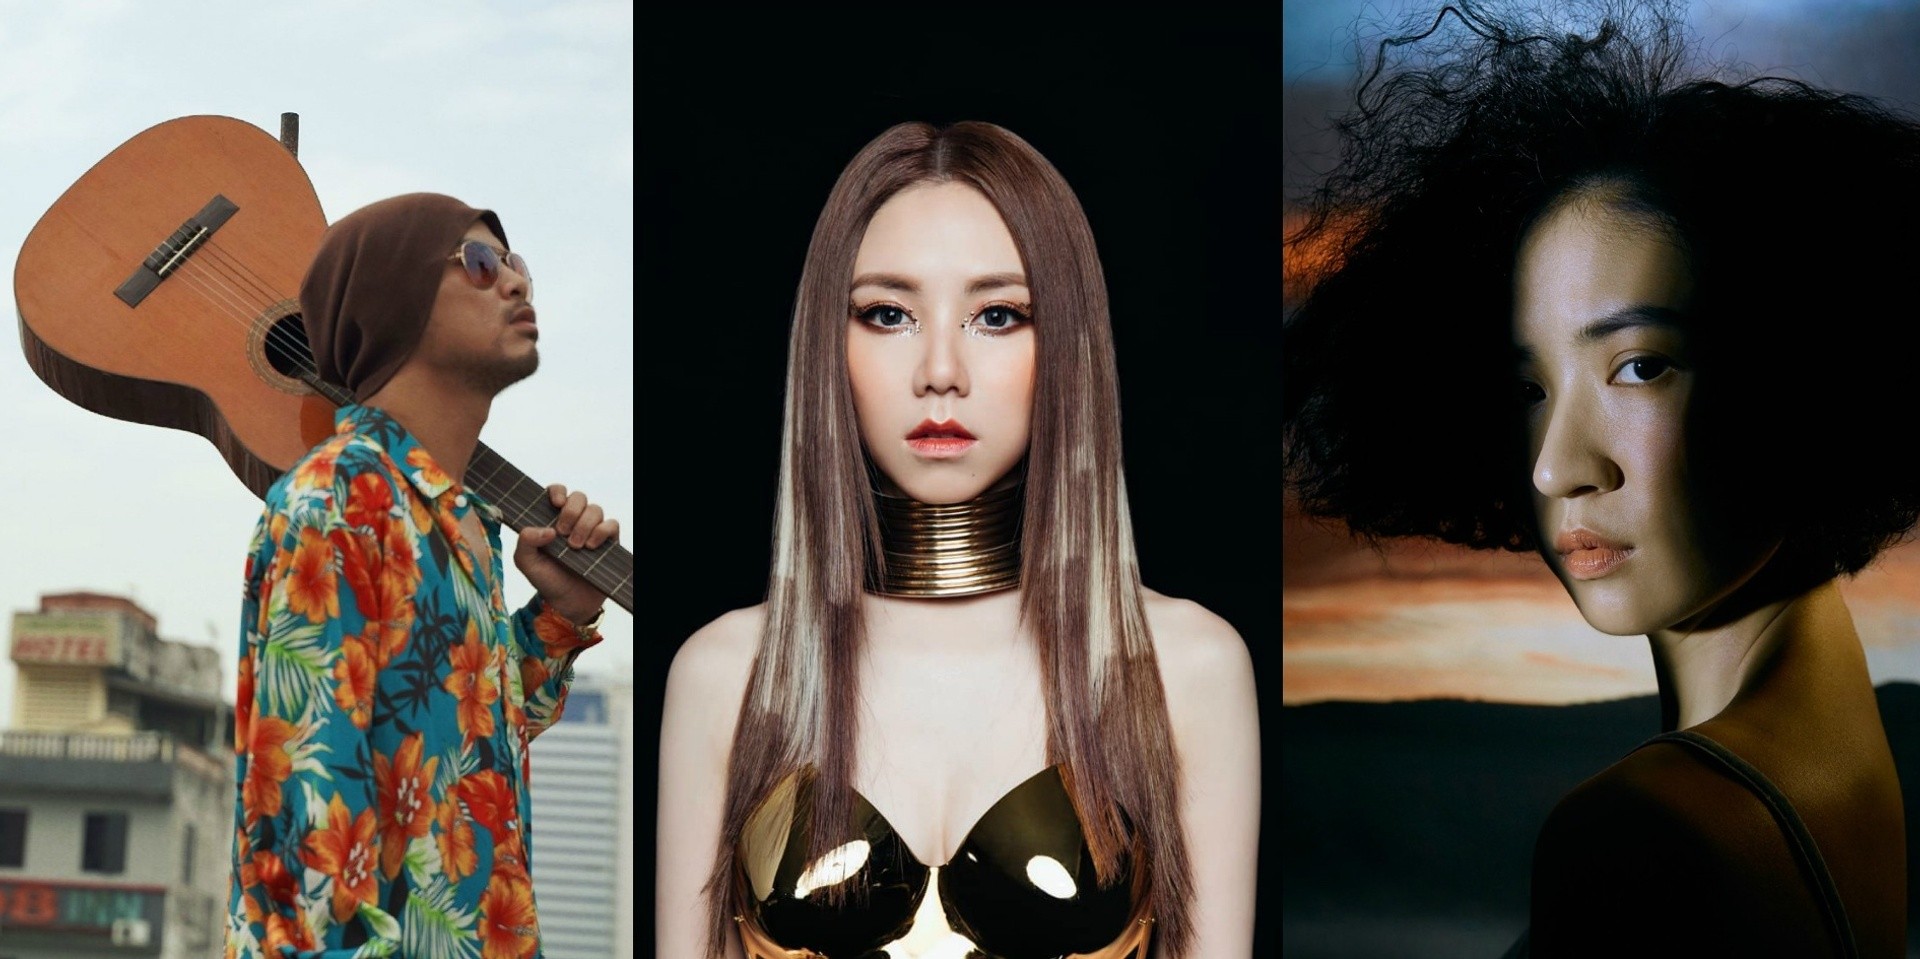 Golden Melody Awards 2020 full list of nominees announced – Namewee, G.E.M., 9m88, and more